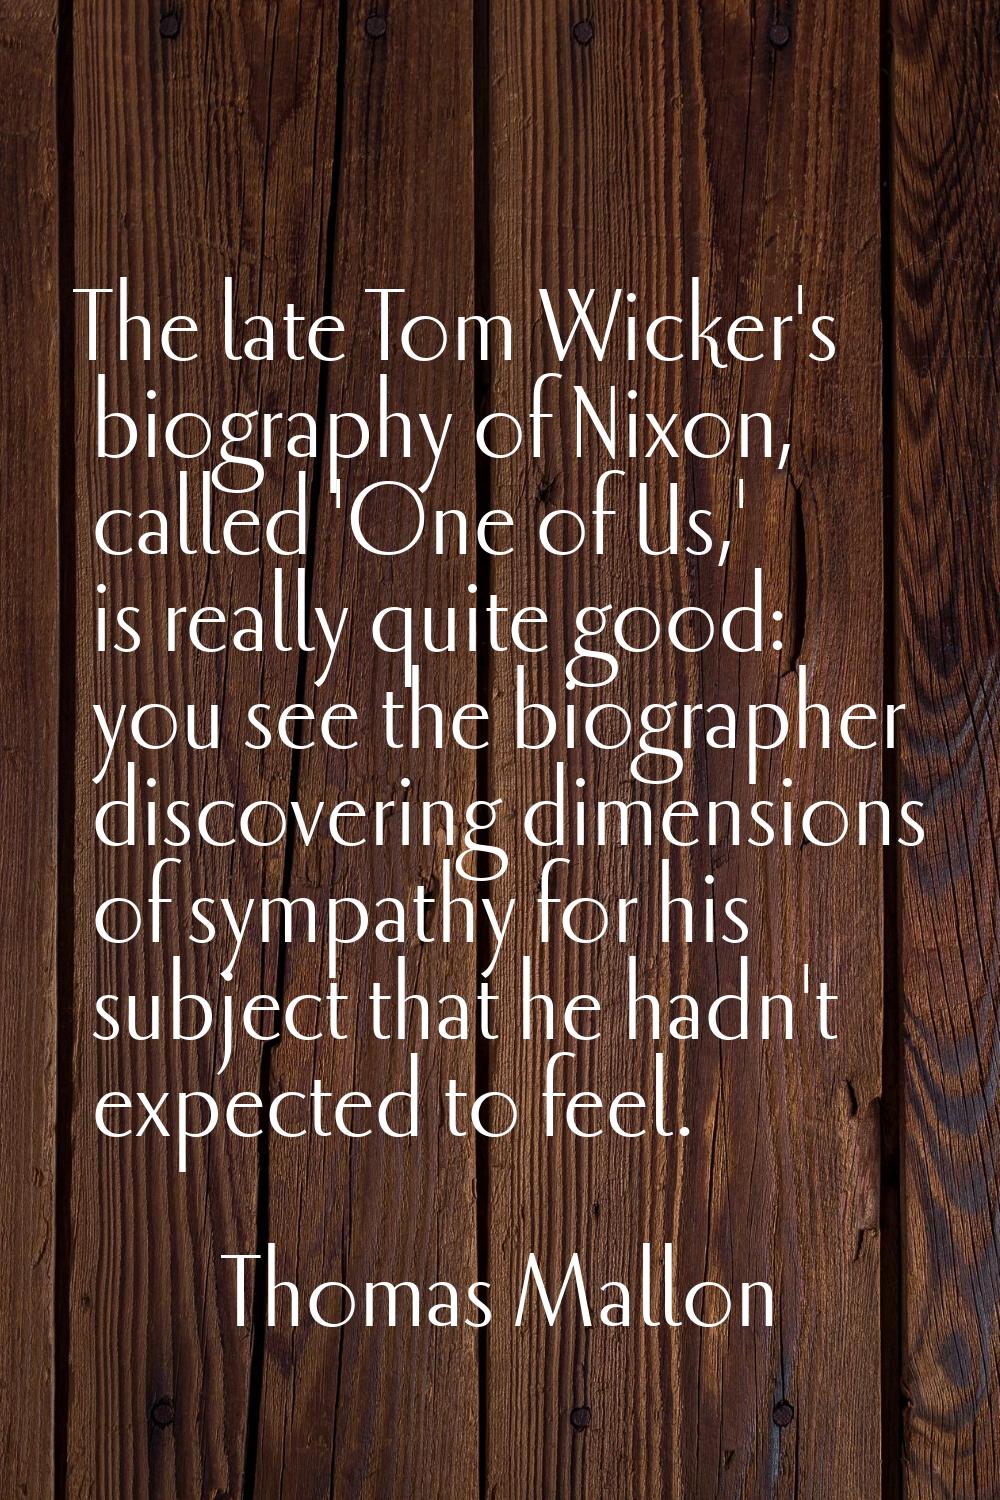 The late Tom Wicker's biography of Nixon, called 'One of Us,' is really quite good: you see the bio